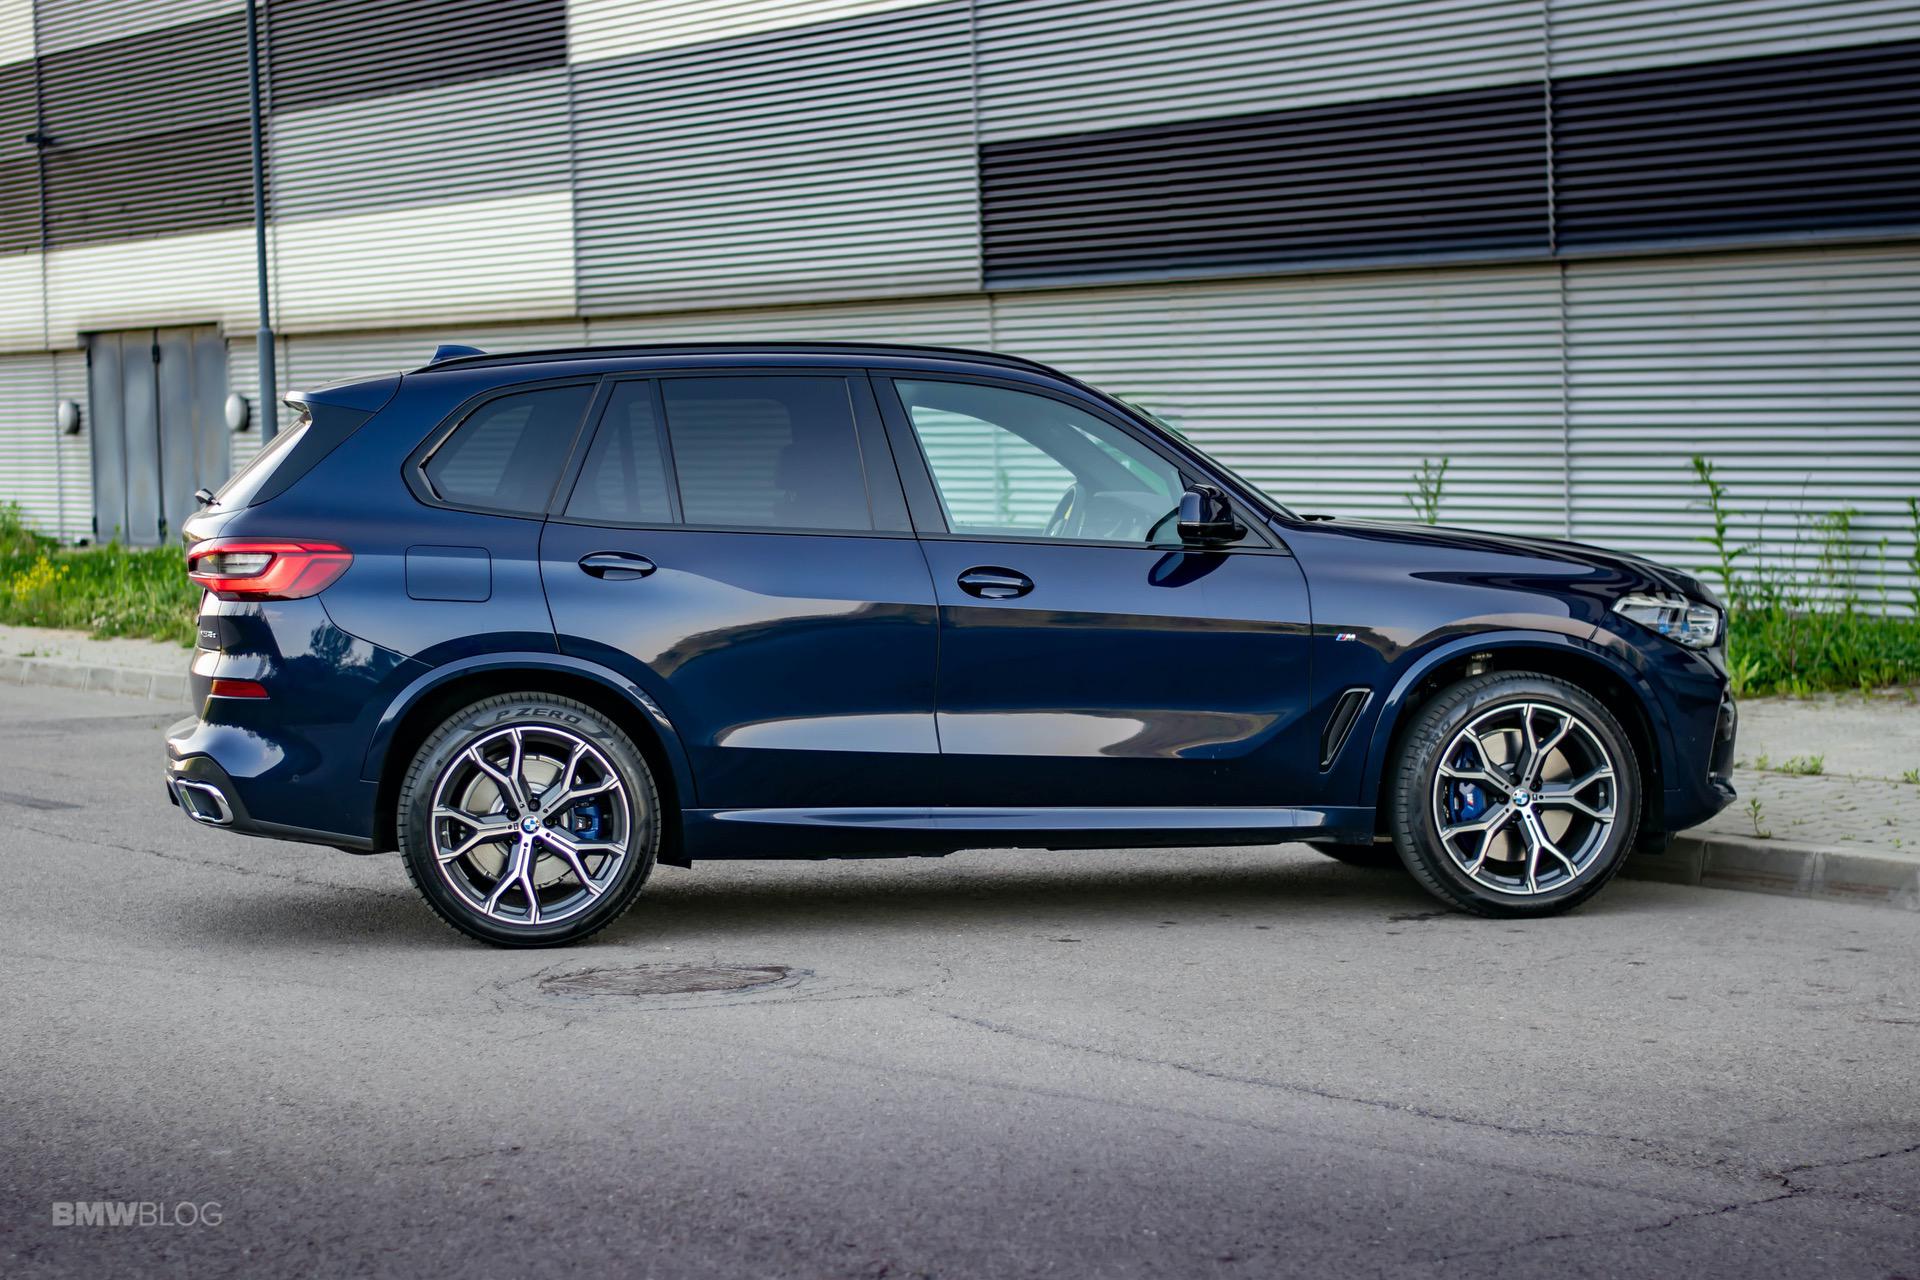 2020 BMW X5 xDrive45e said to be priced at $65,400